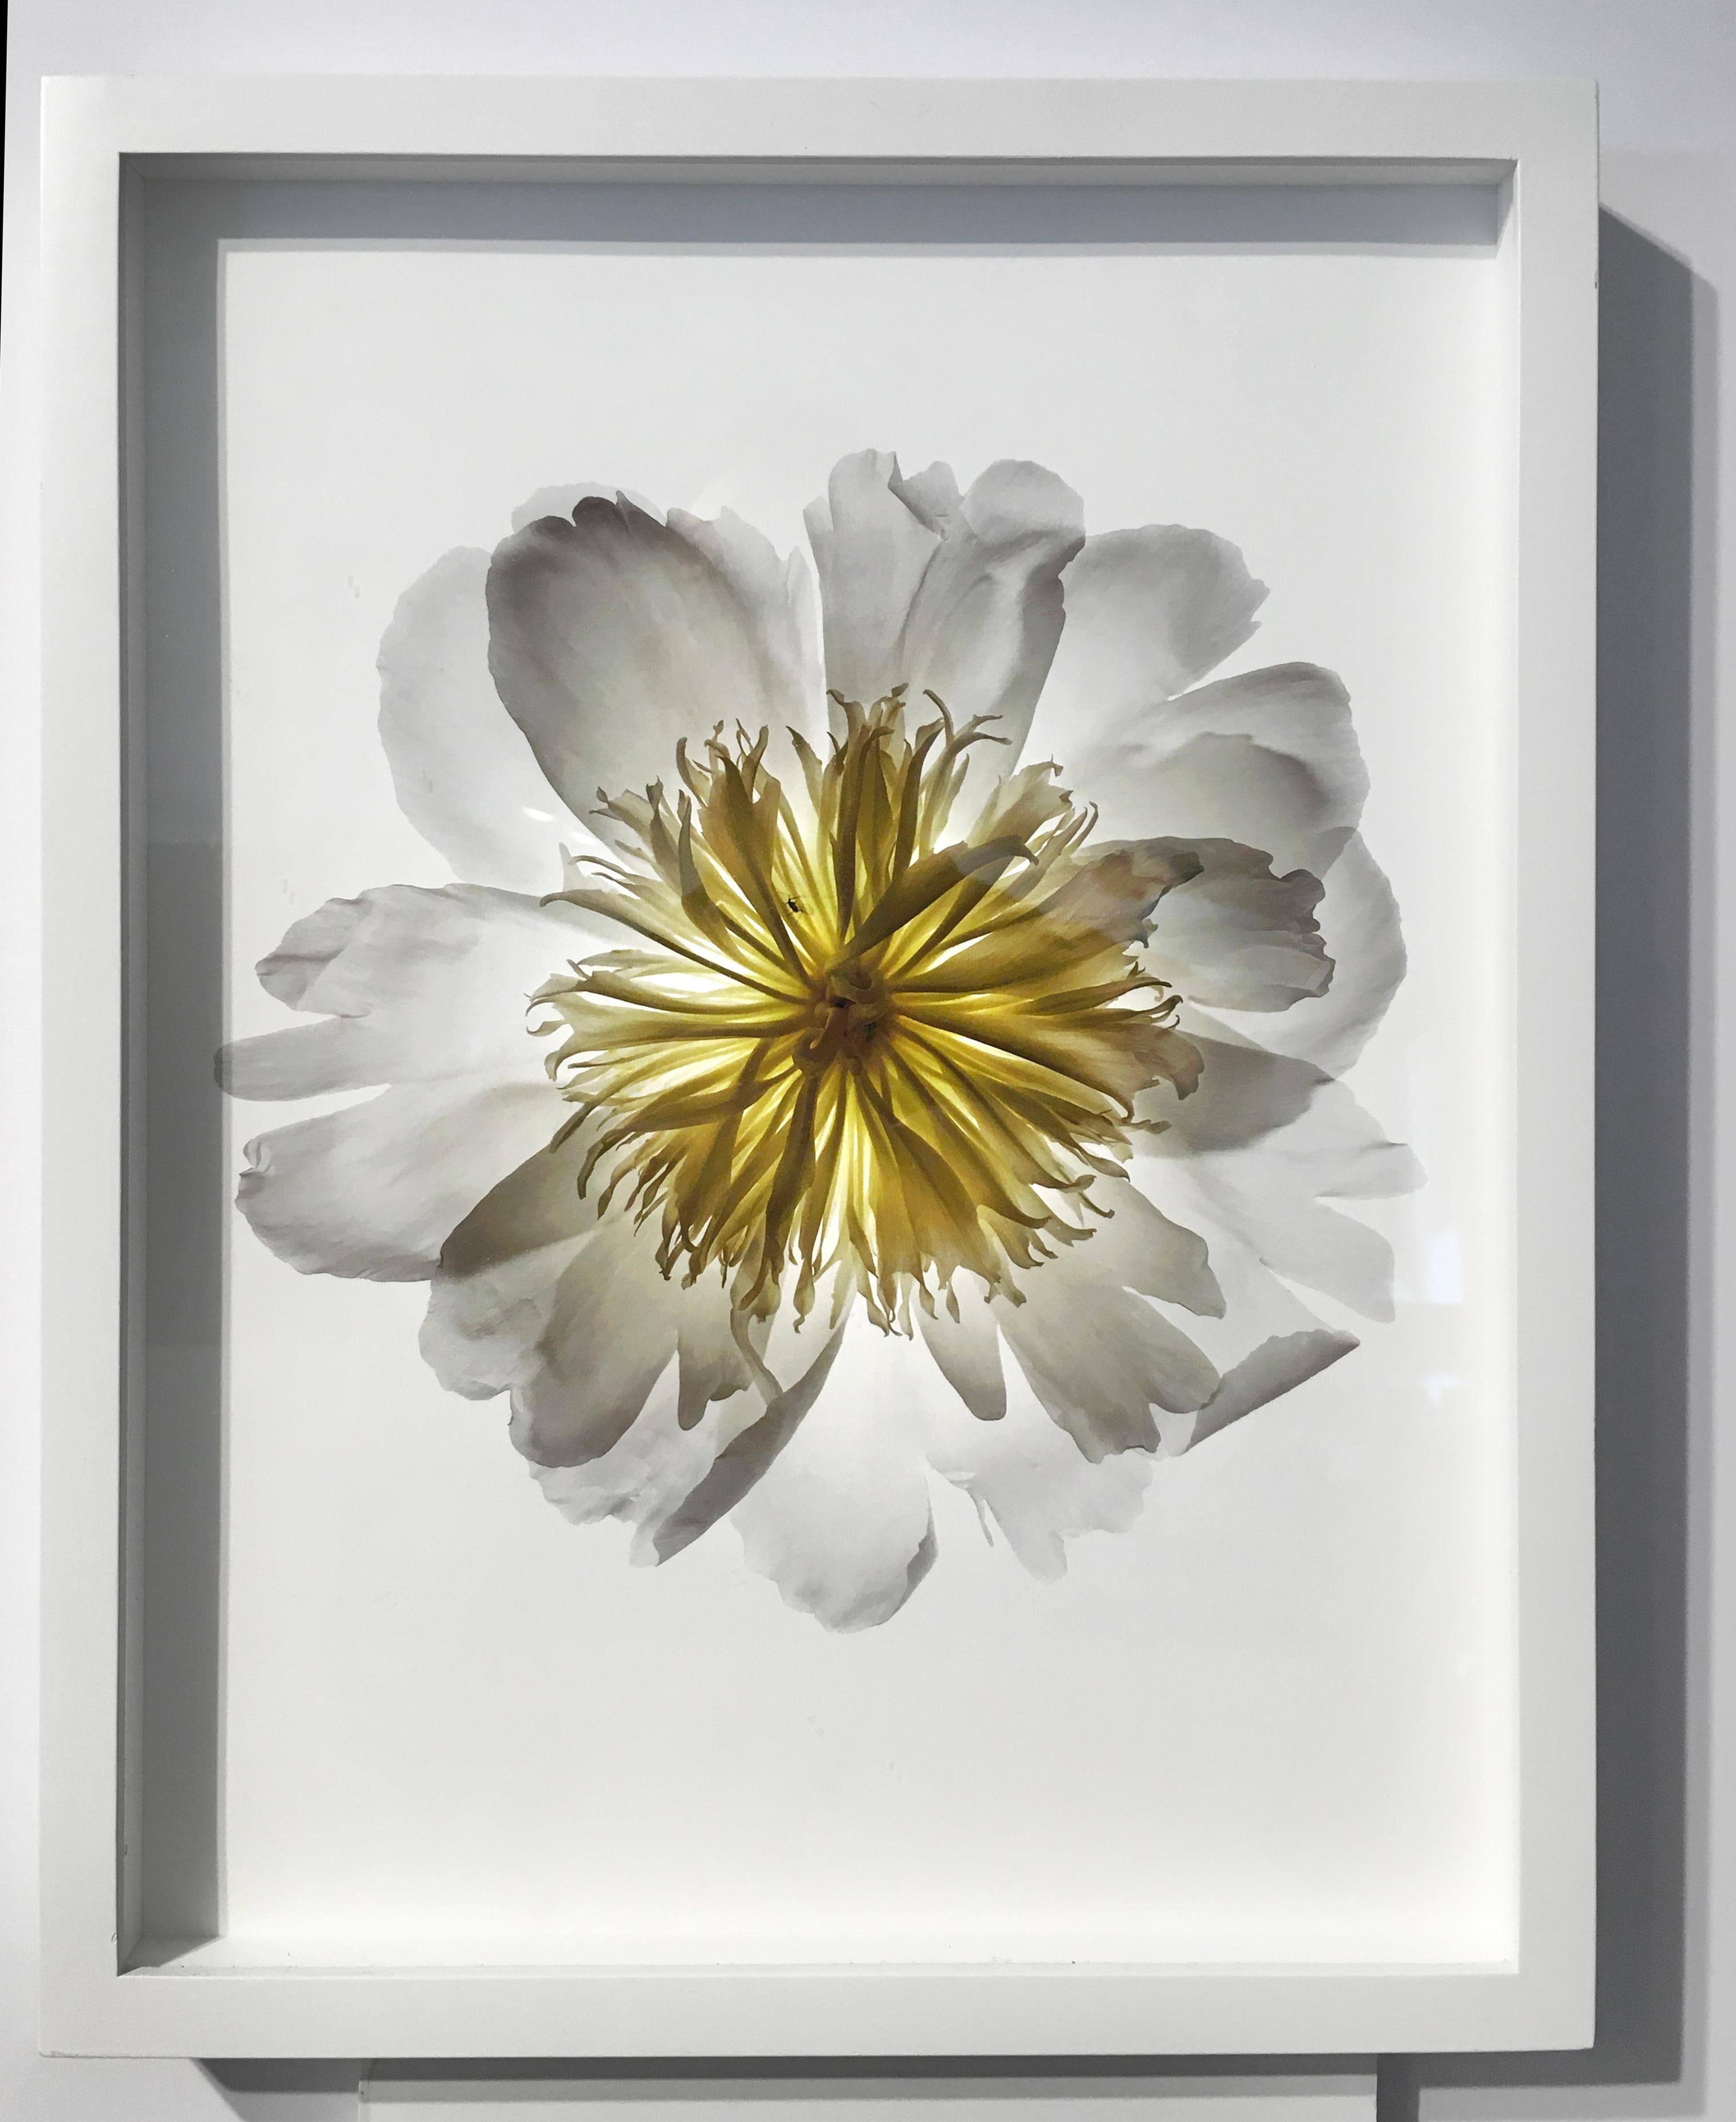 Untitled No. 80 (Framed Still Life Photograph of a Pink Flower on White) - Beige Color Photograph by Chad Kleitsch